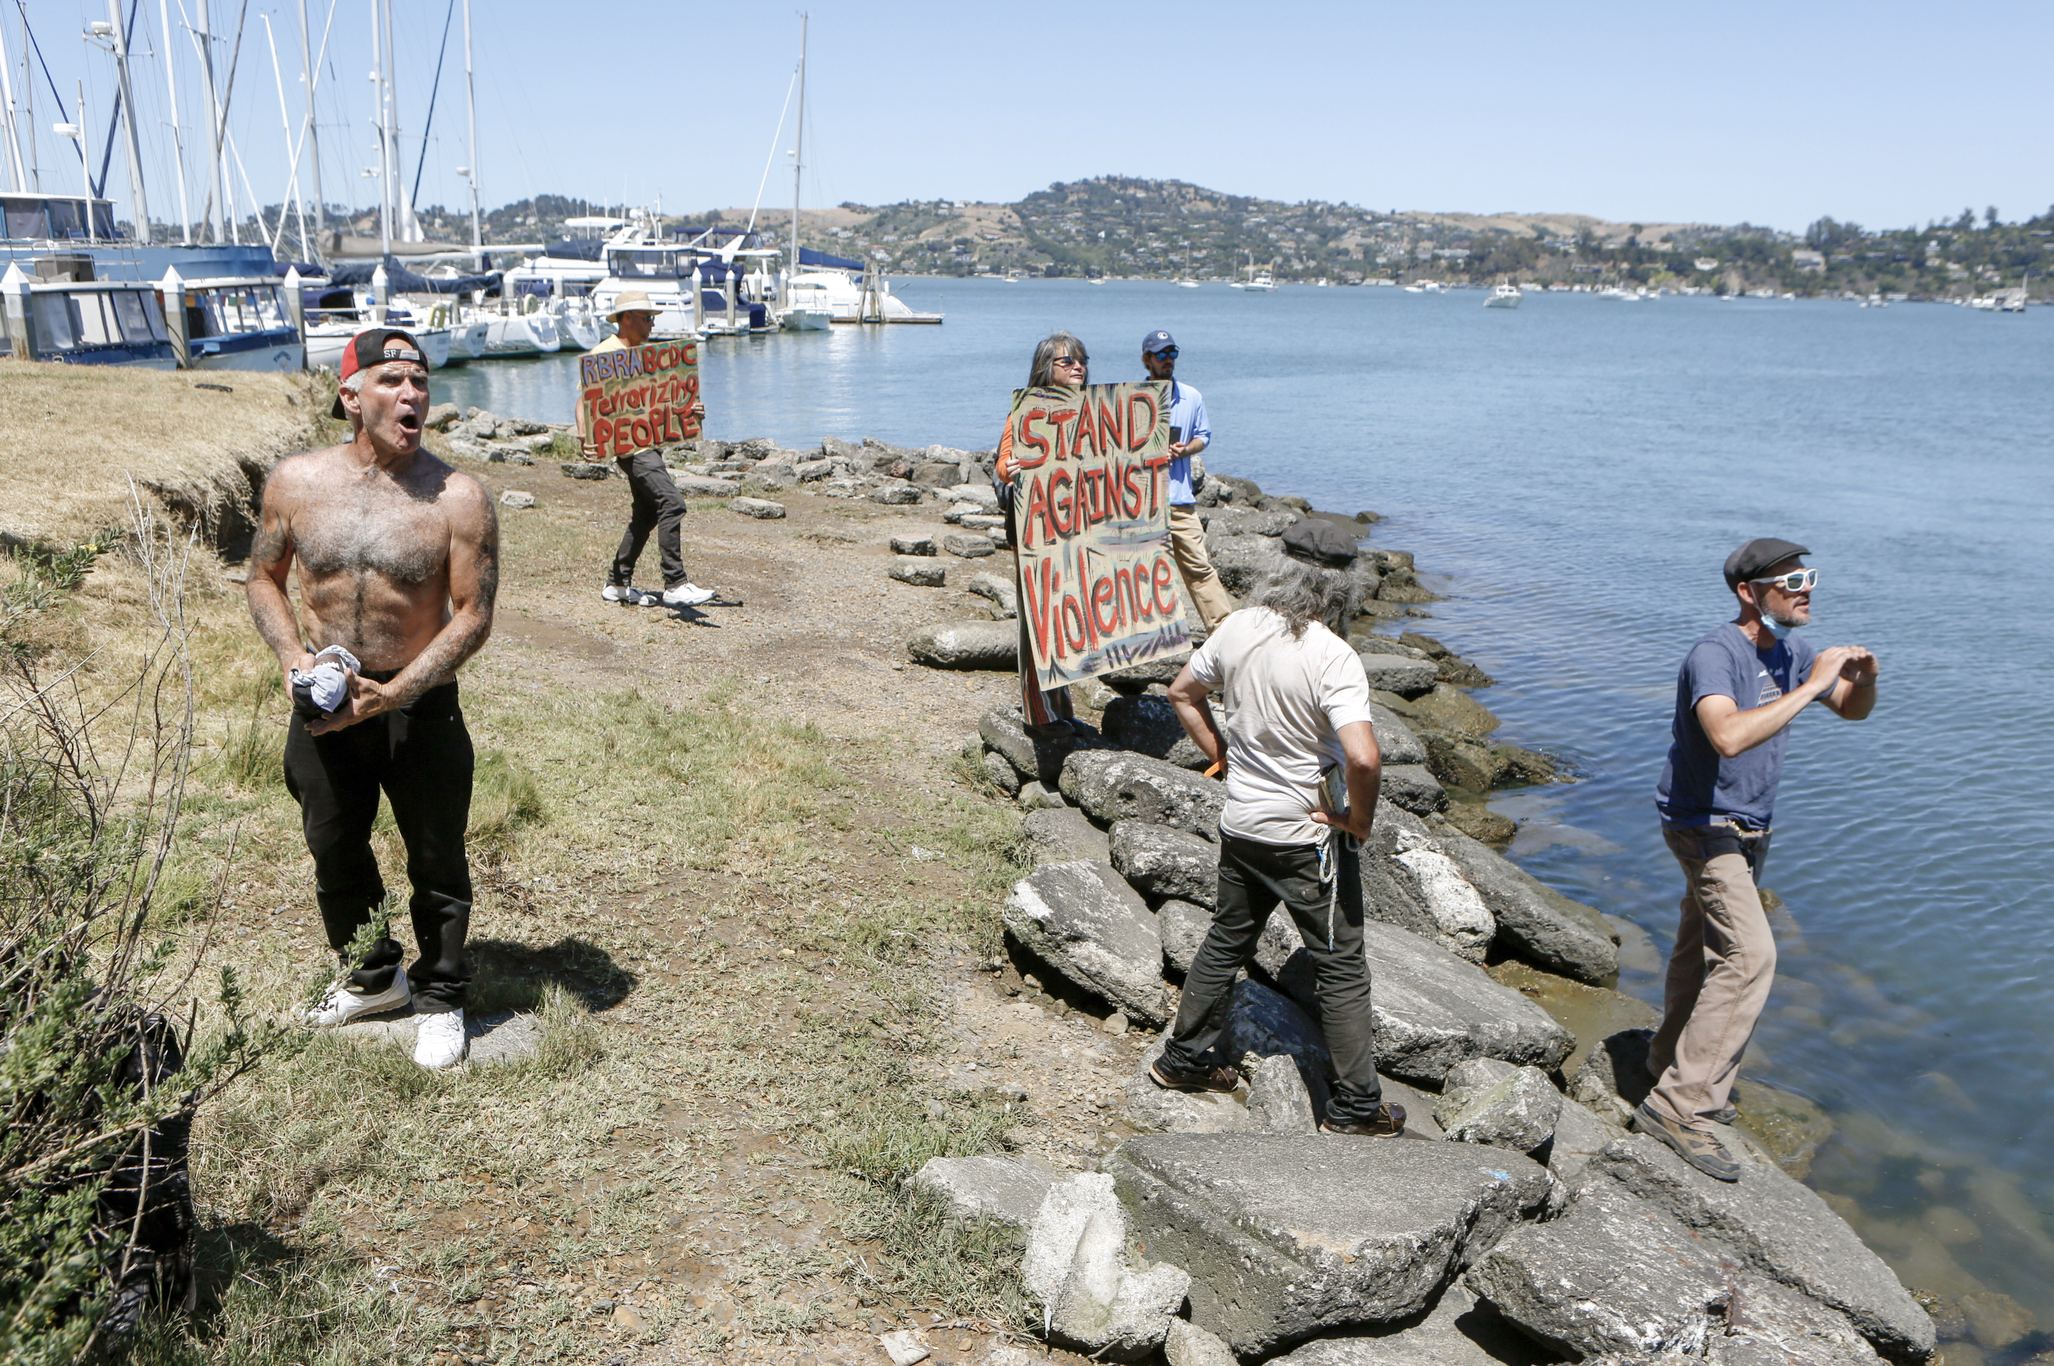 Housing War on the Water - 